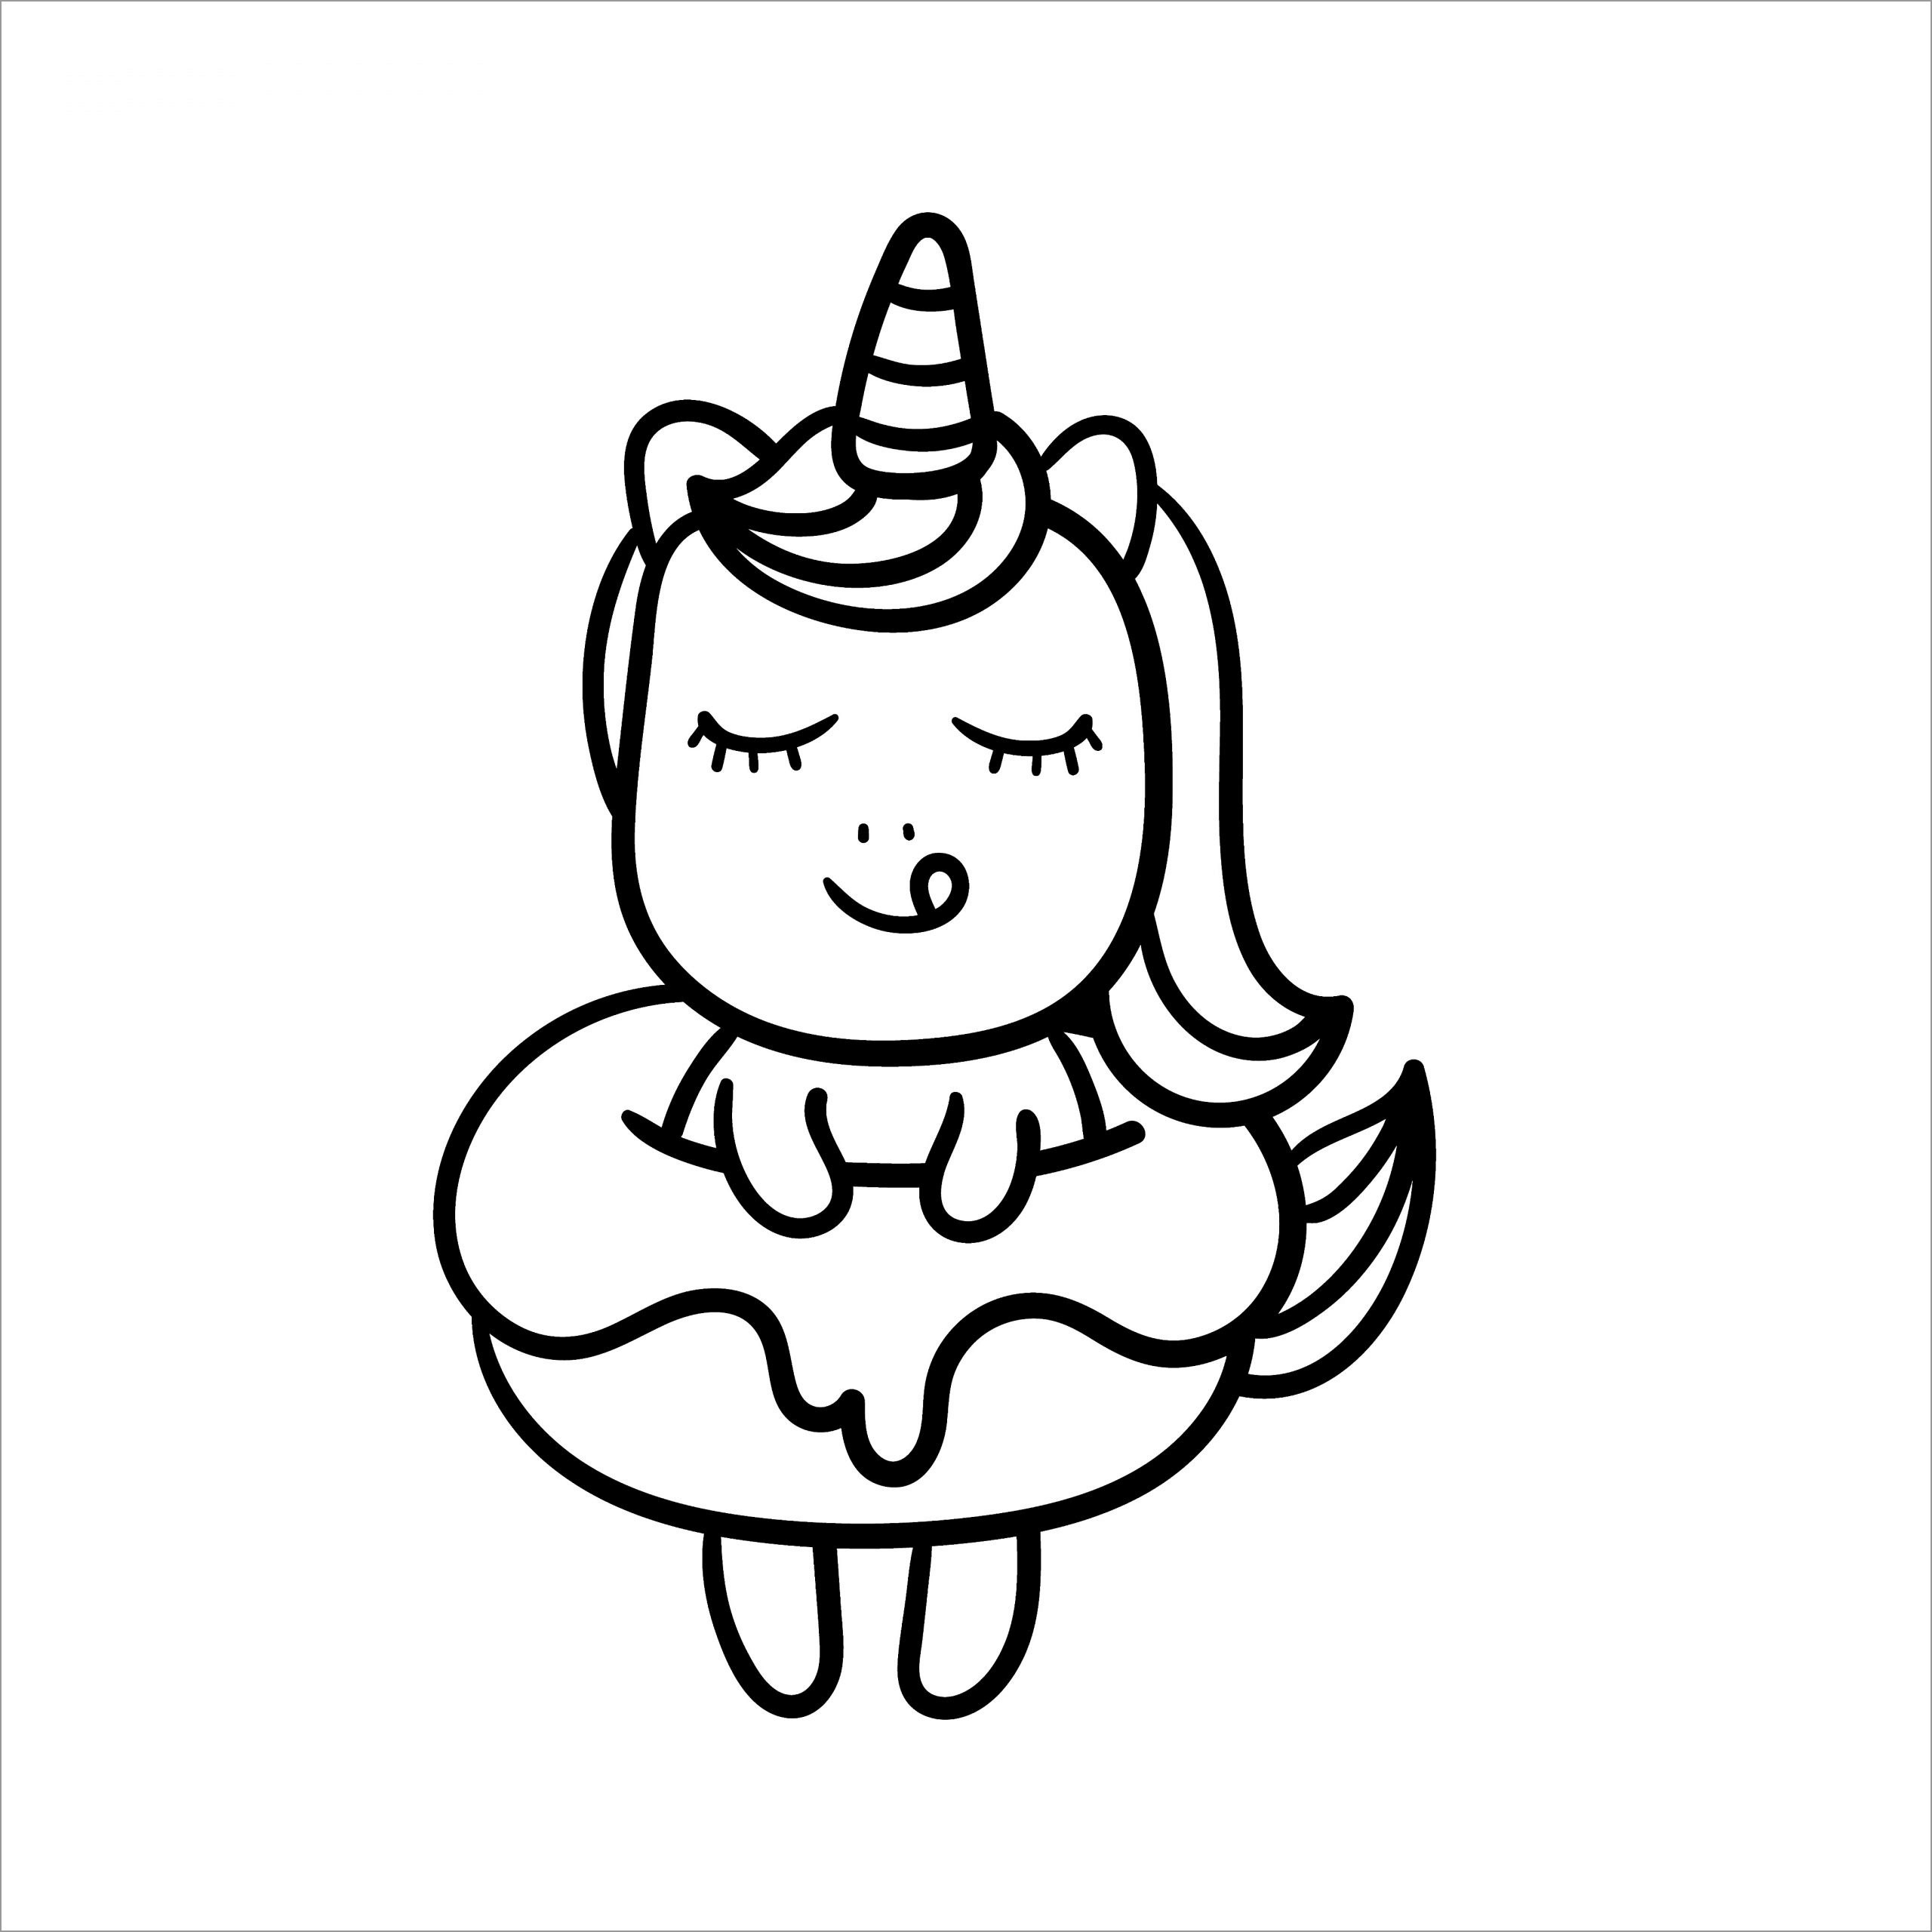 Unicorn Donut Coloring Page   ColoringBay